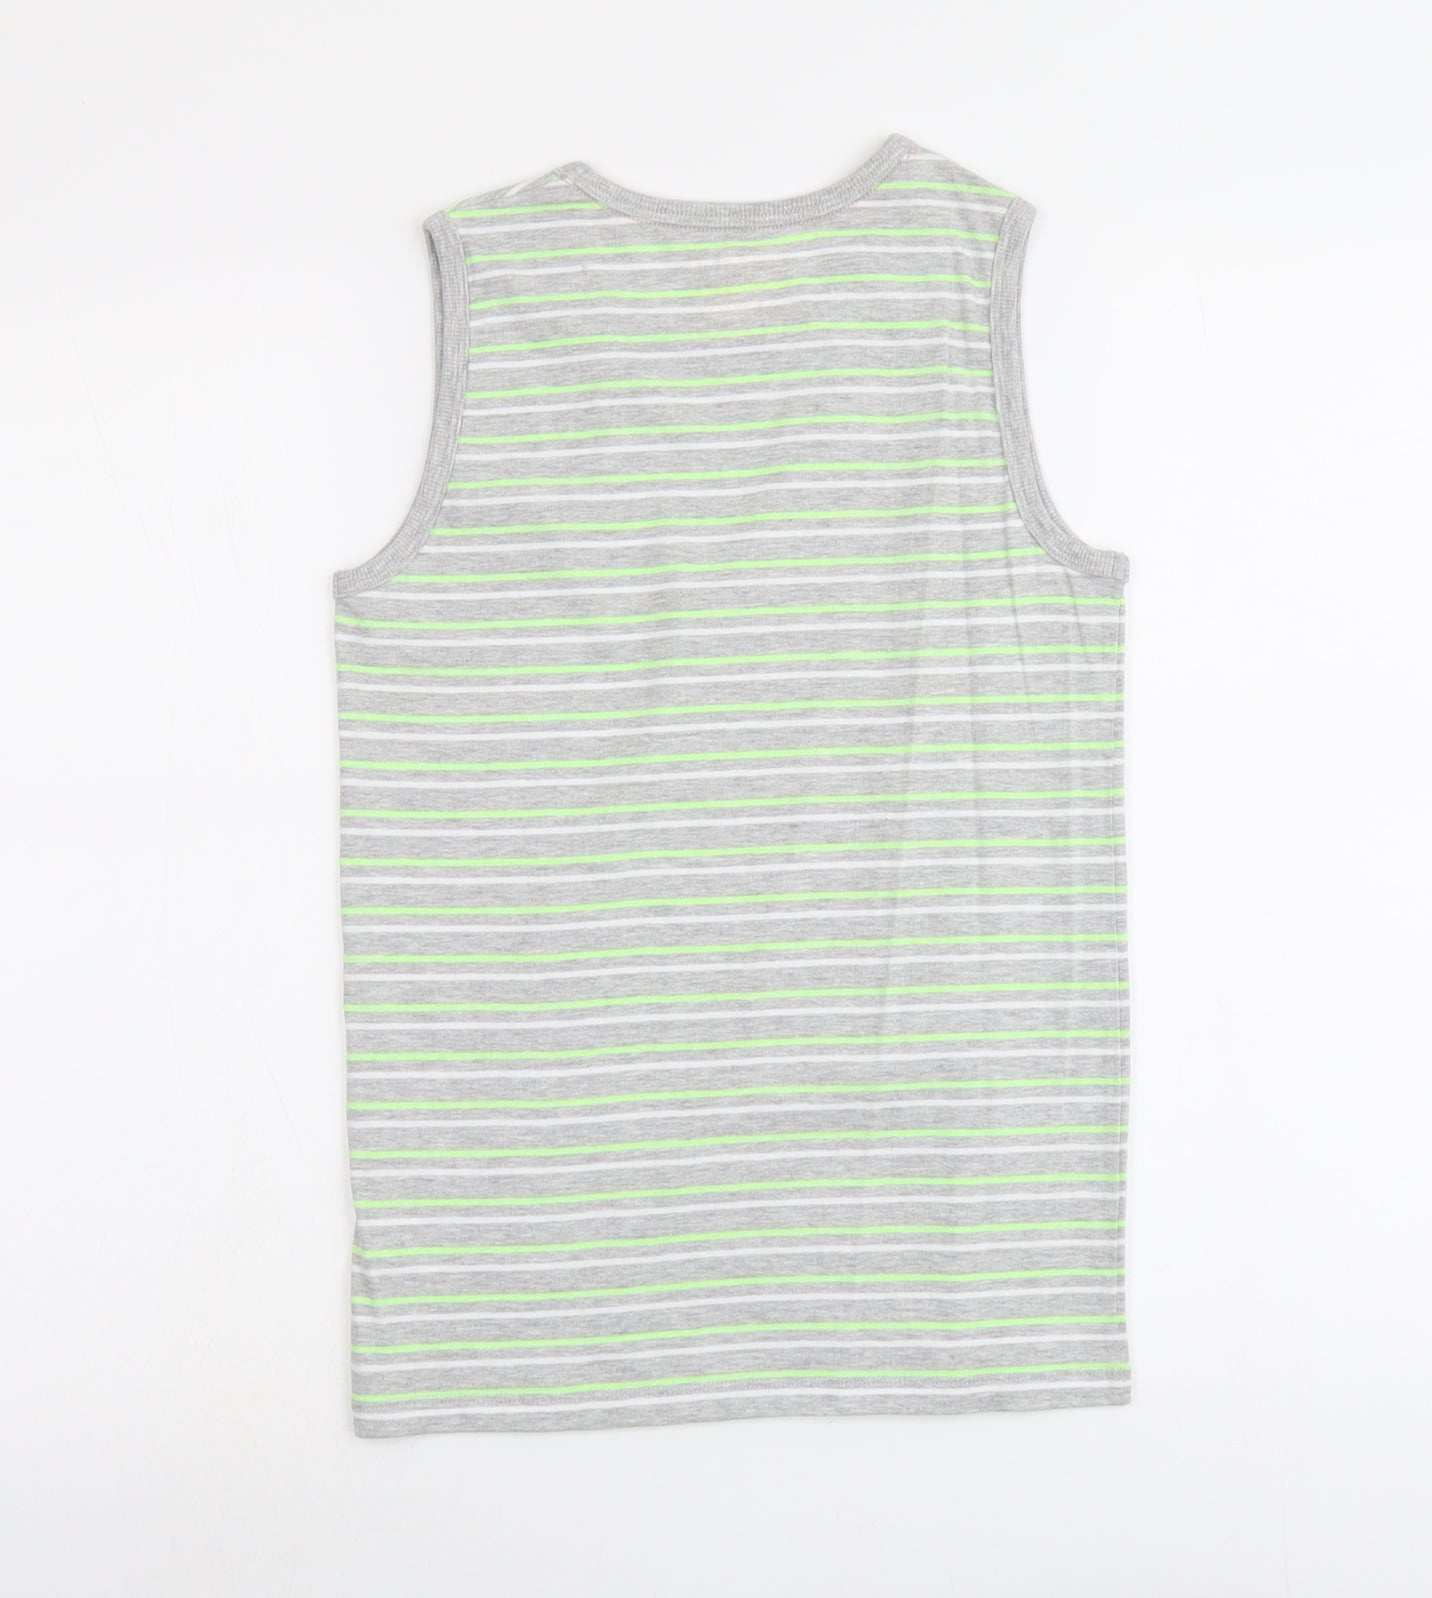 Urbn-Dept Boys Grey Striped Cotton Pullover Tank Size 12 Years Round Neck Pullover